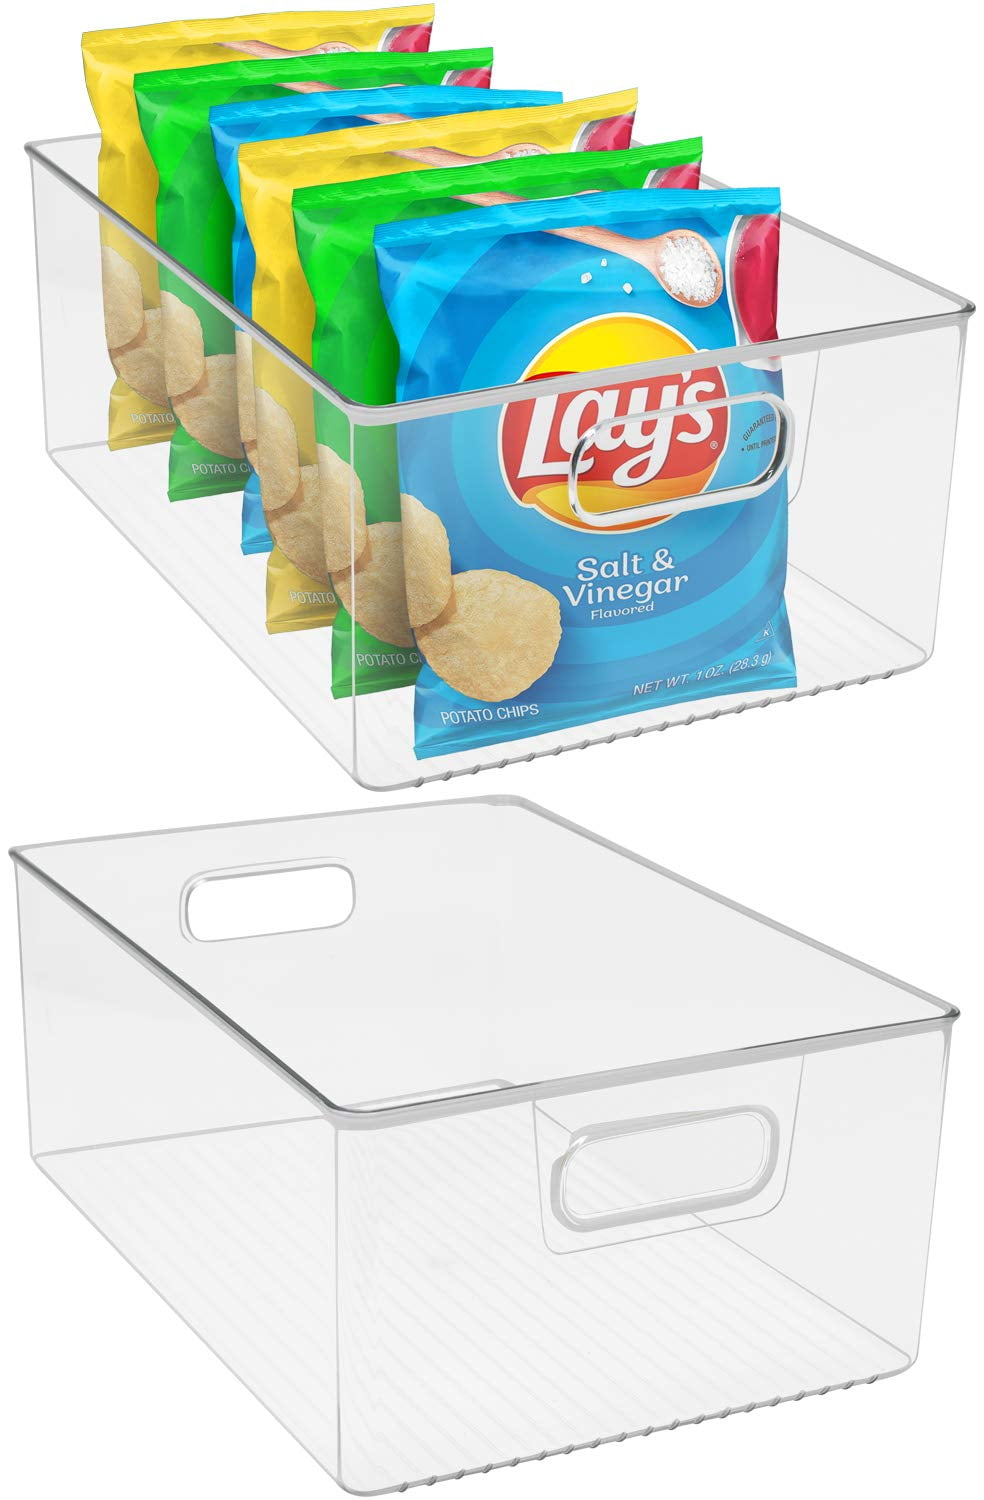  Sorbus Cleaning Supplies Organizer - Clear Containers for Organizing  Cleaning Supplies Under the Sink - Clear Bins for Organizing Kitchen and  Bathroom Essentials - Clear Plastic Storage Bins (2 Pack) : Home & Kitchen